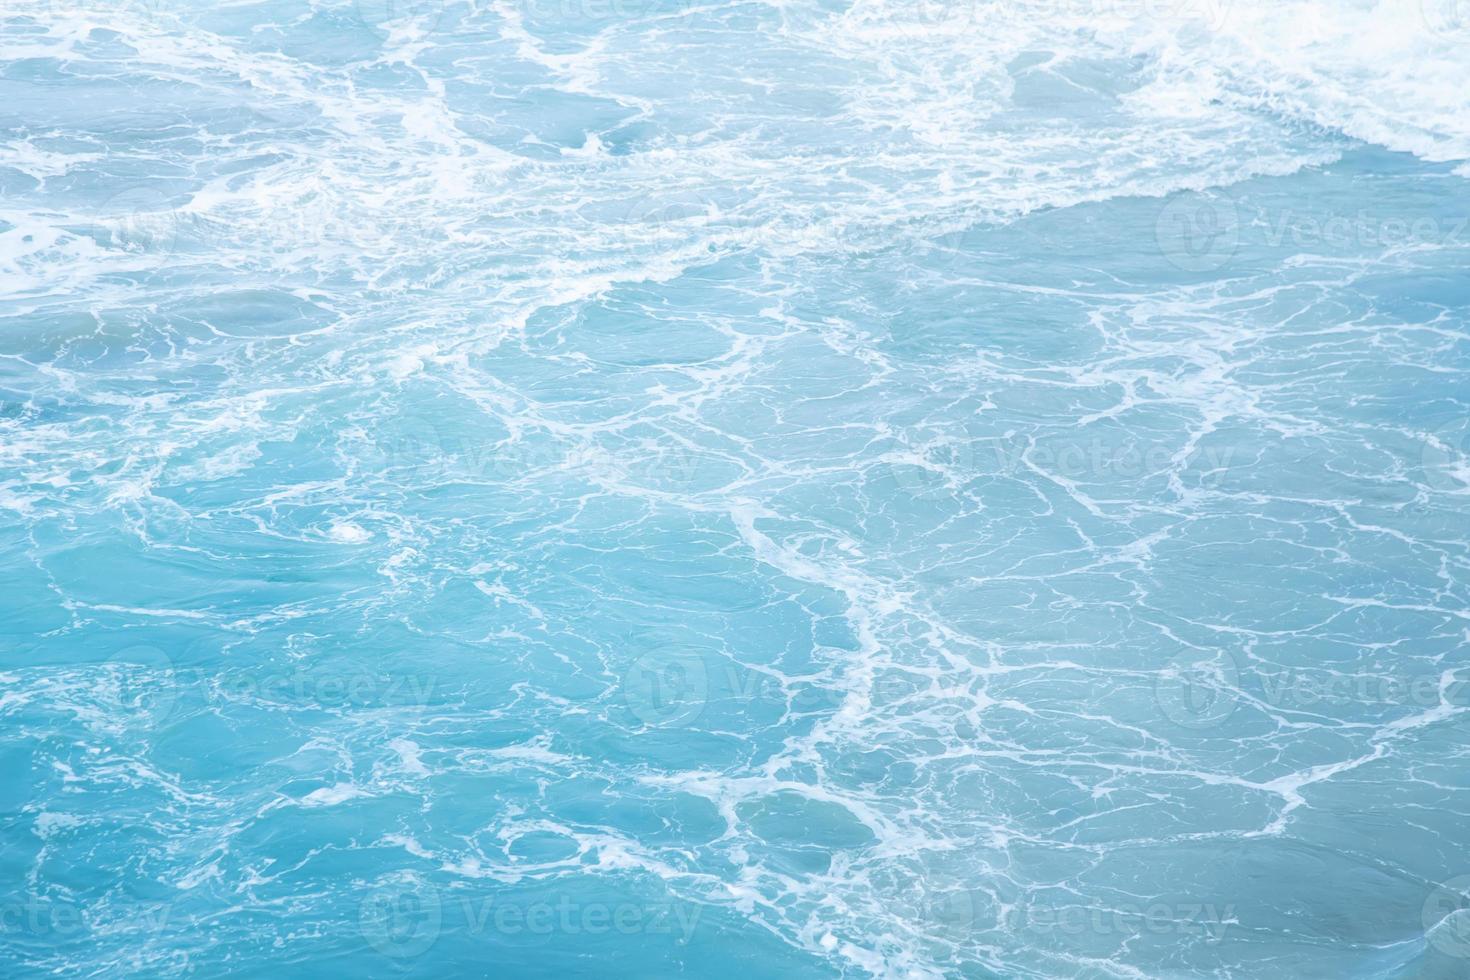 Sea  Waves in ocean wave Splashing Ripple Water. Blue water background. Leave space to write descriptive text. photo